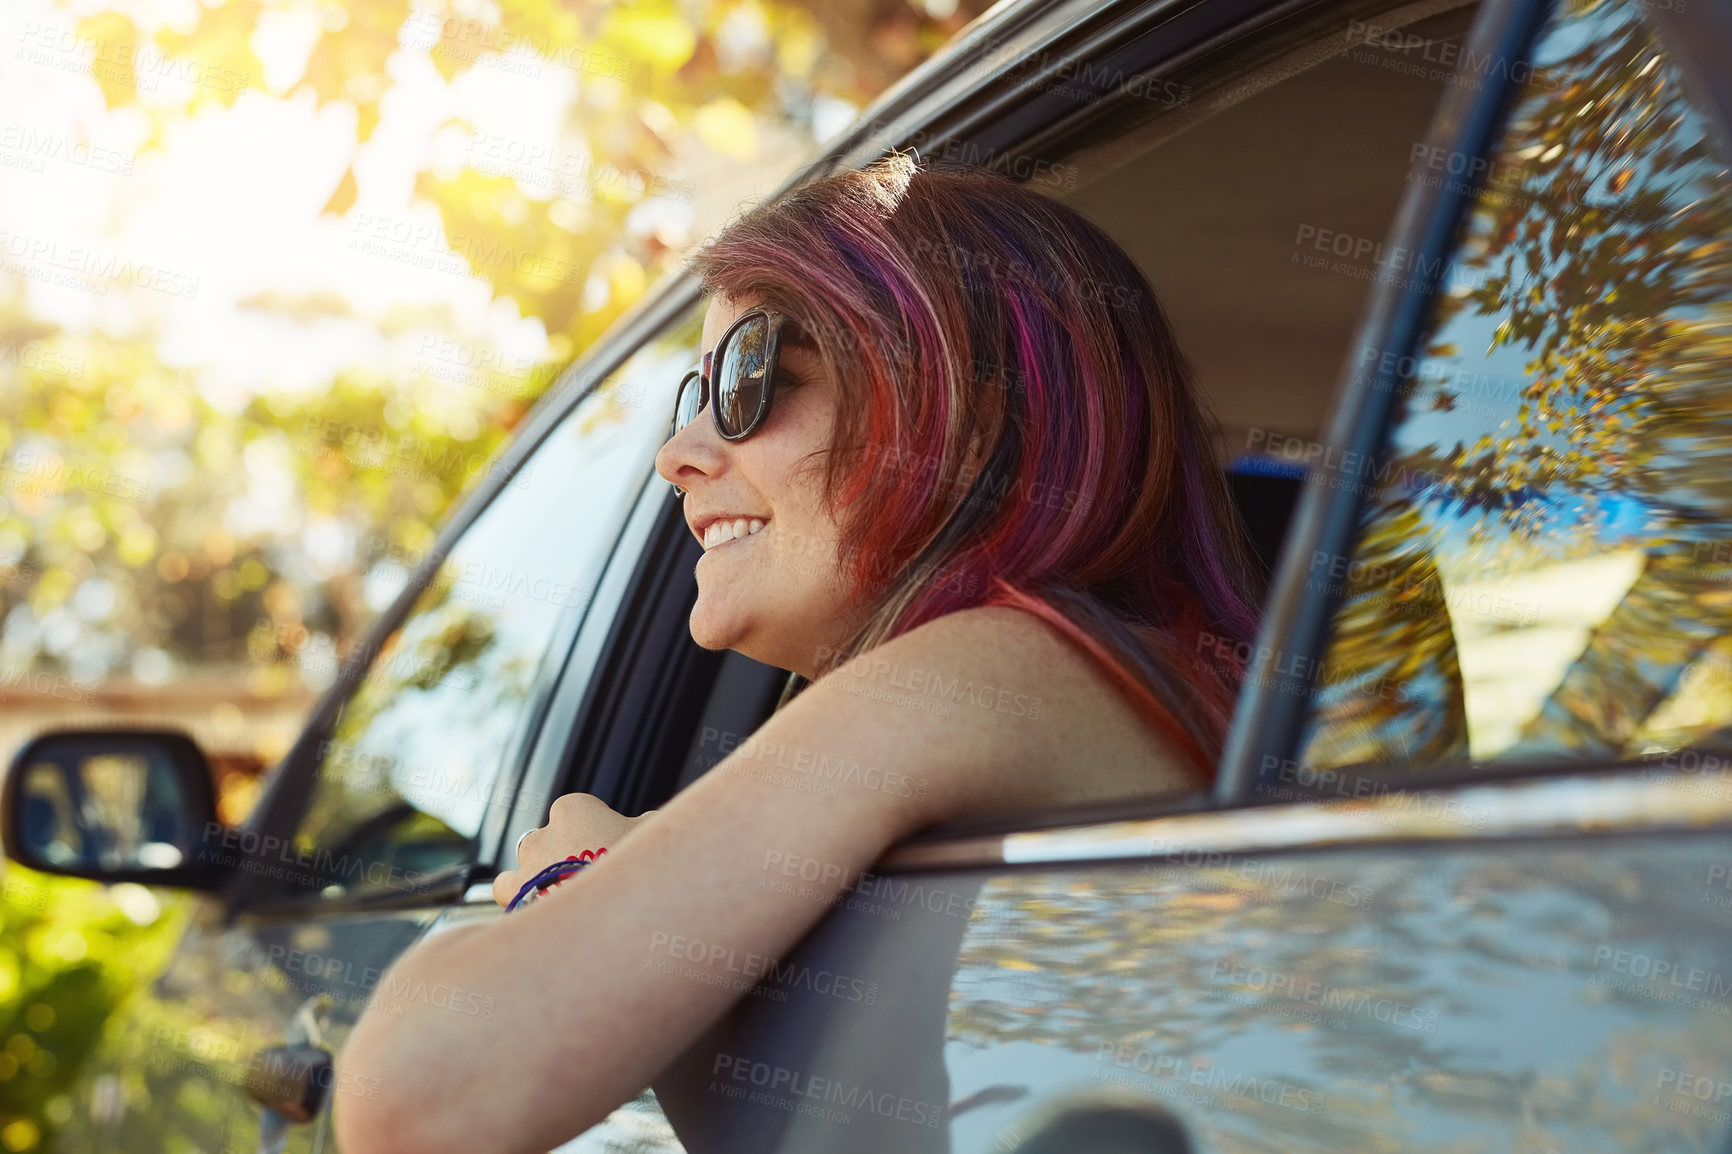 Buy stock photo Shot of young woman taking a break and enjoying nature while sitting in the backseat of a car